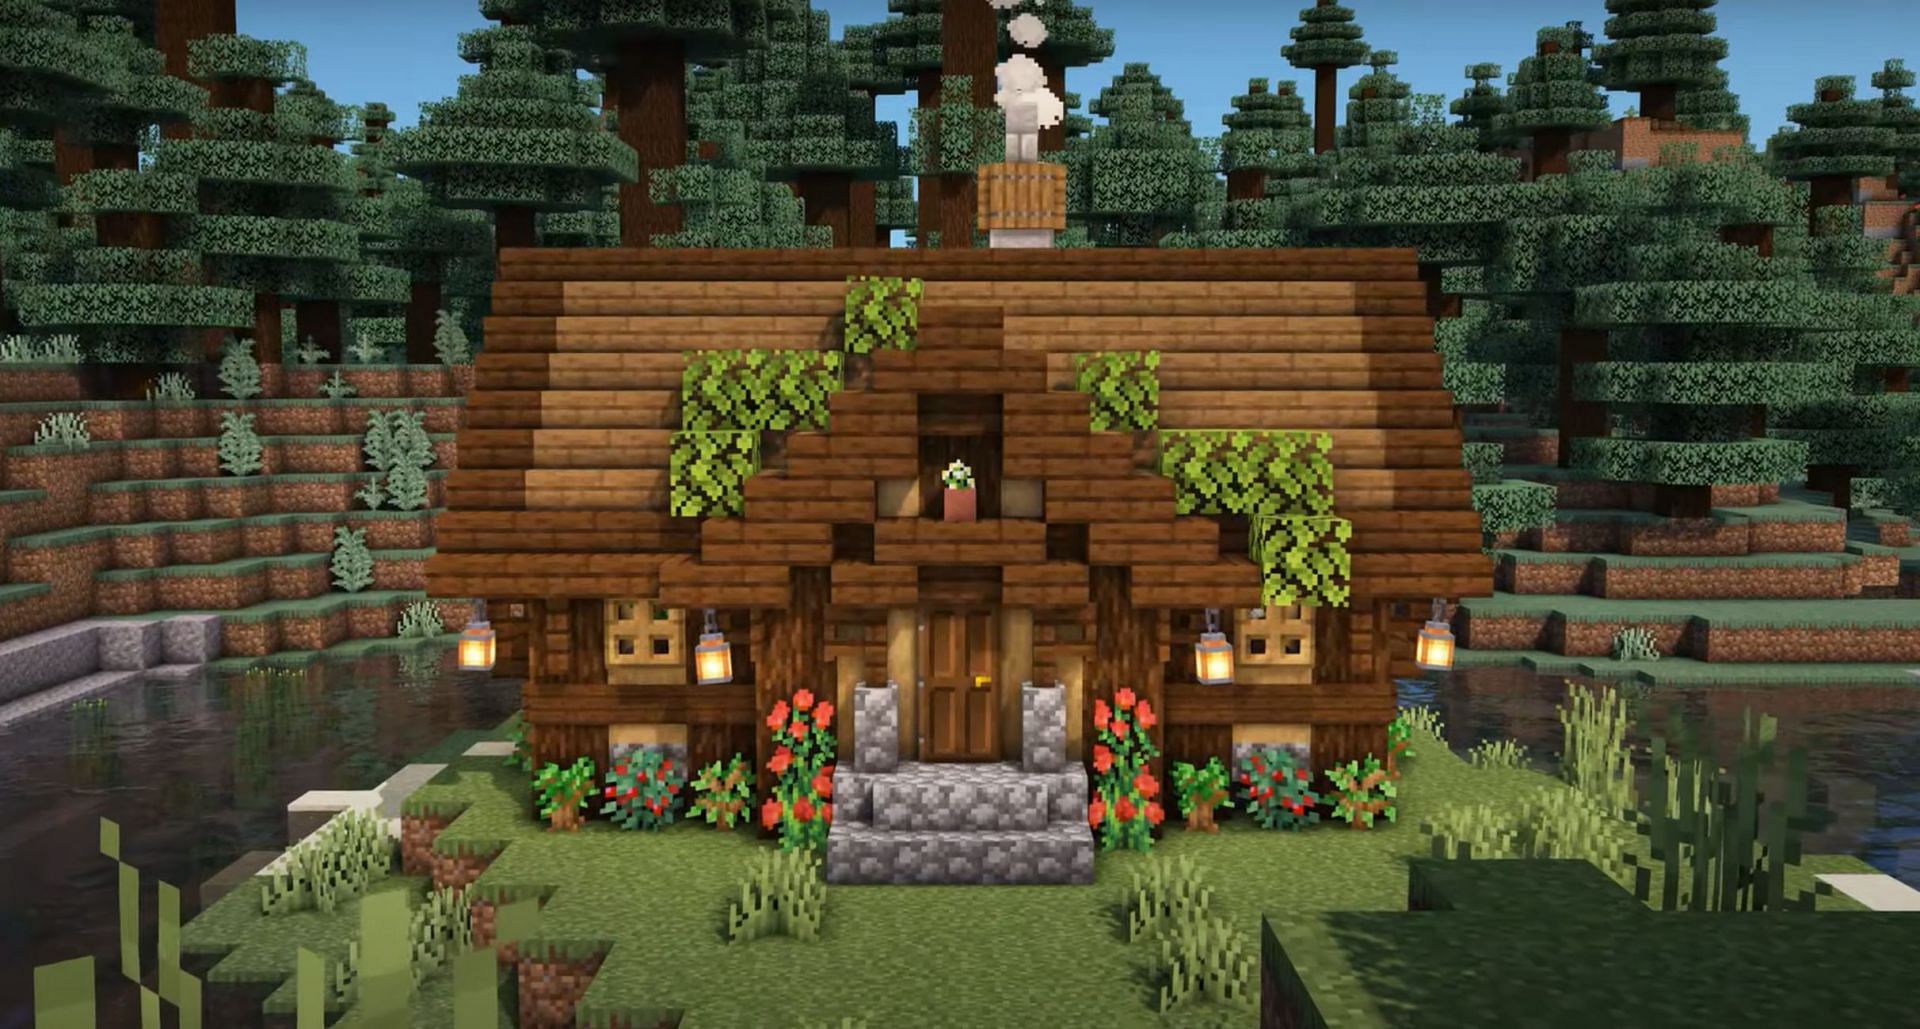 This cottage is small and decorative without requiring any extraneous resources (Image via Ayvocado/YouTube)